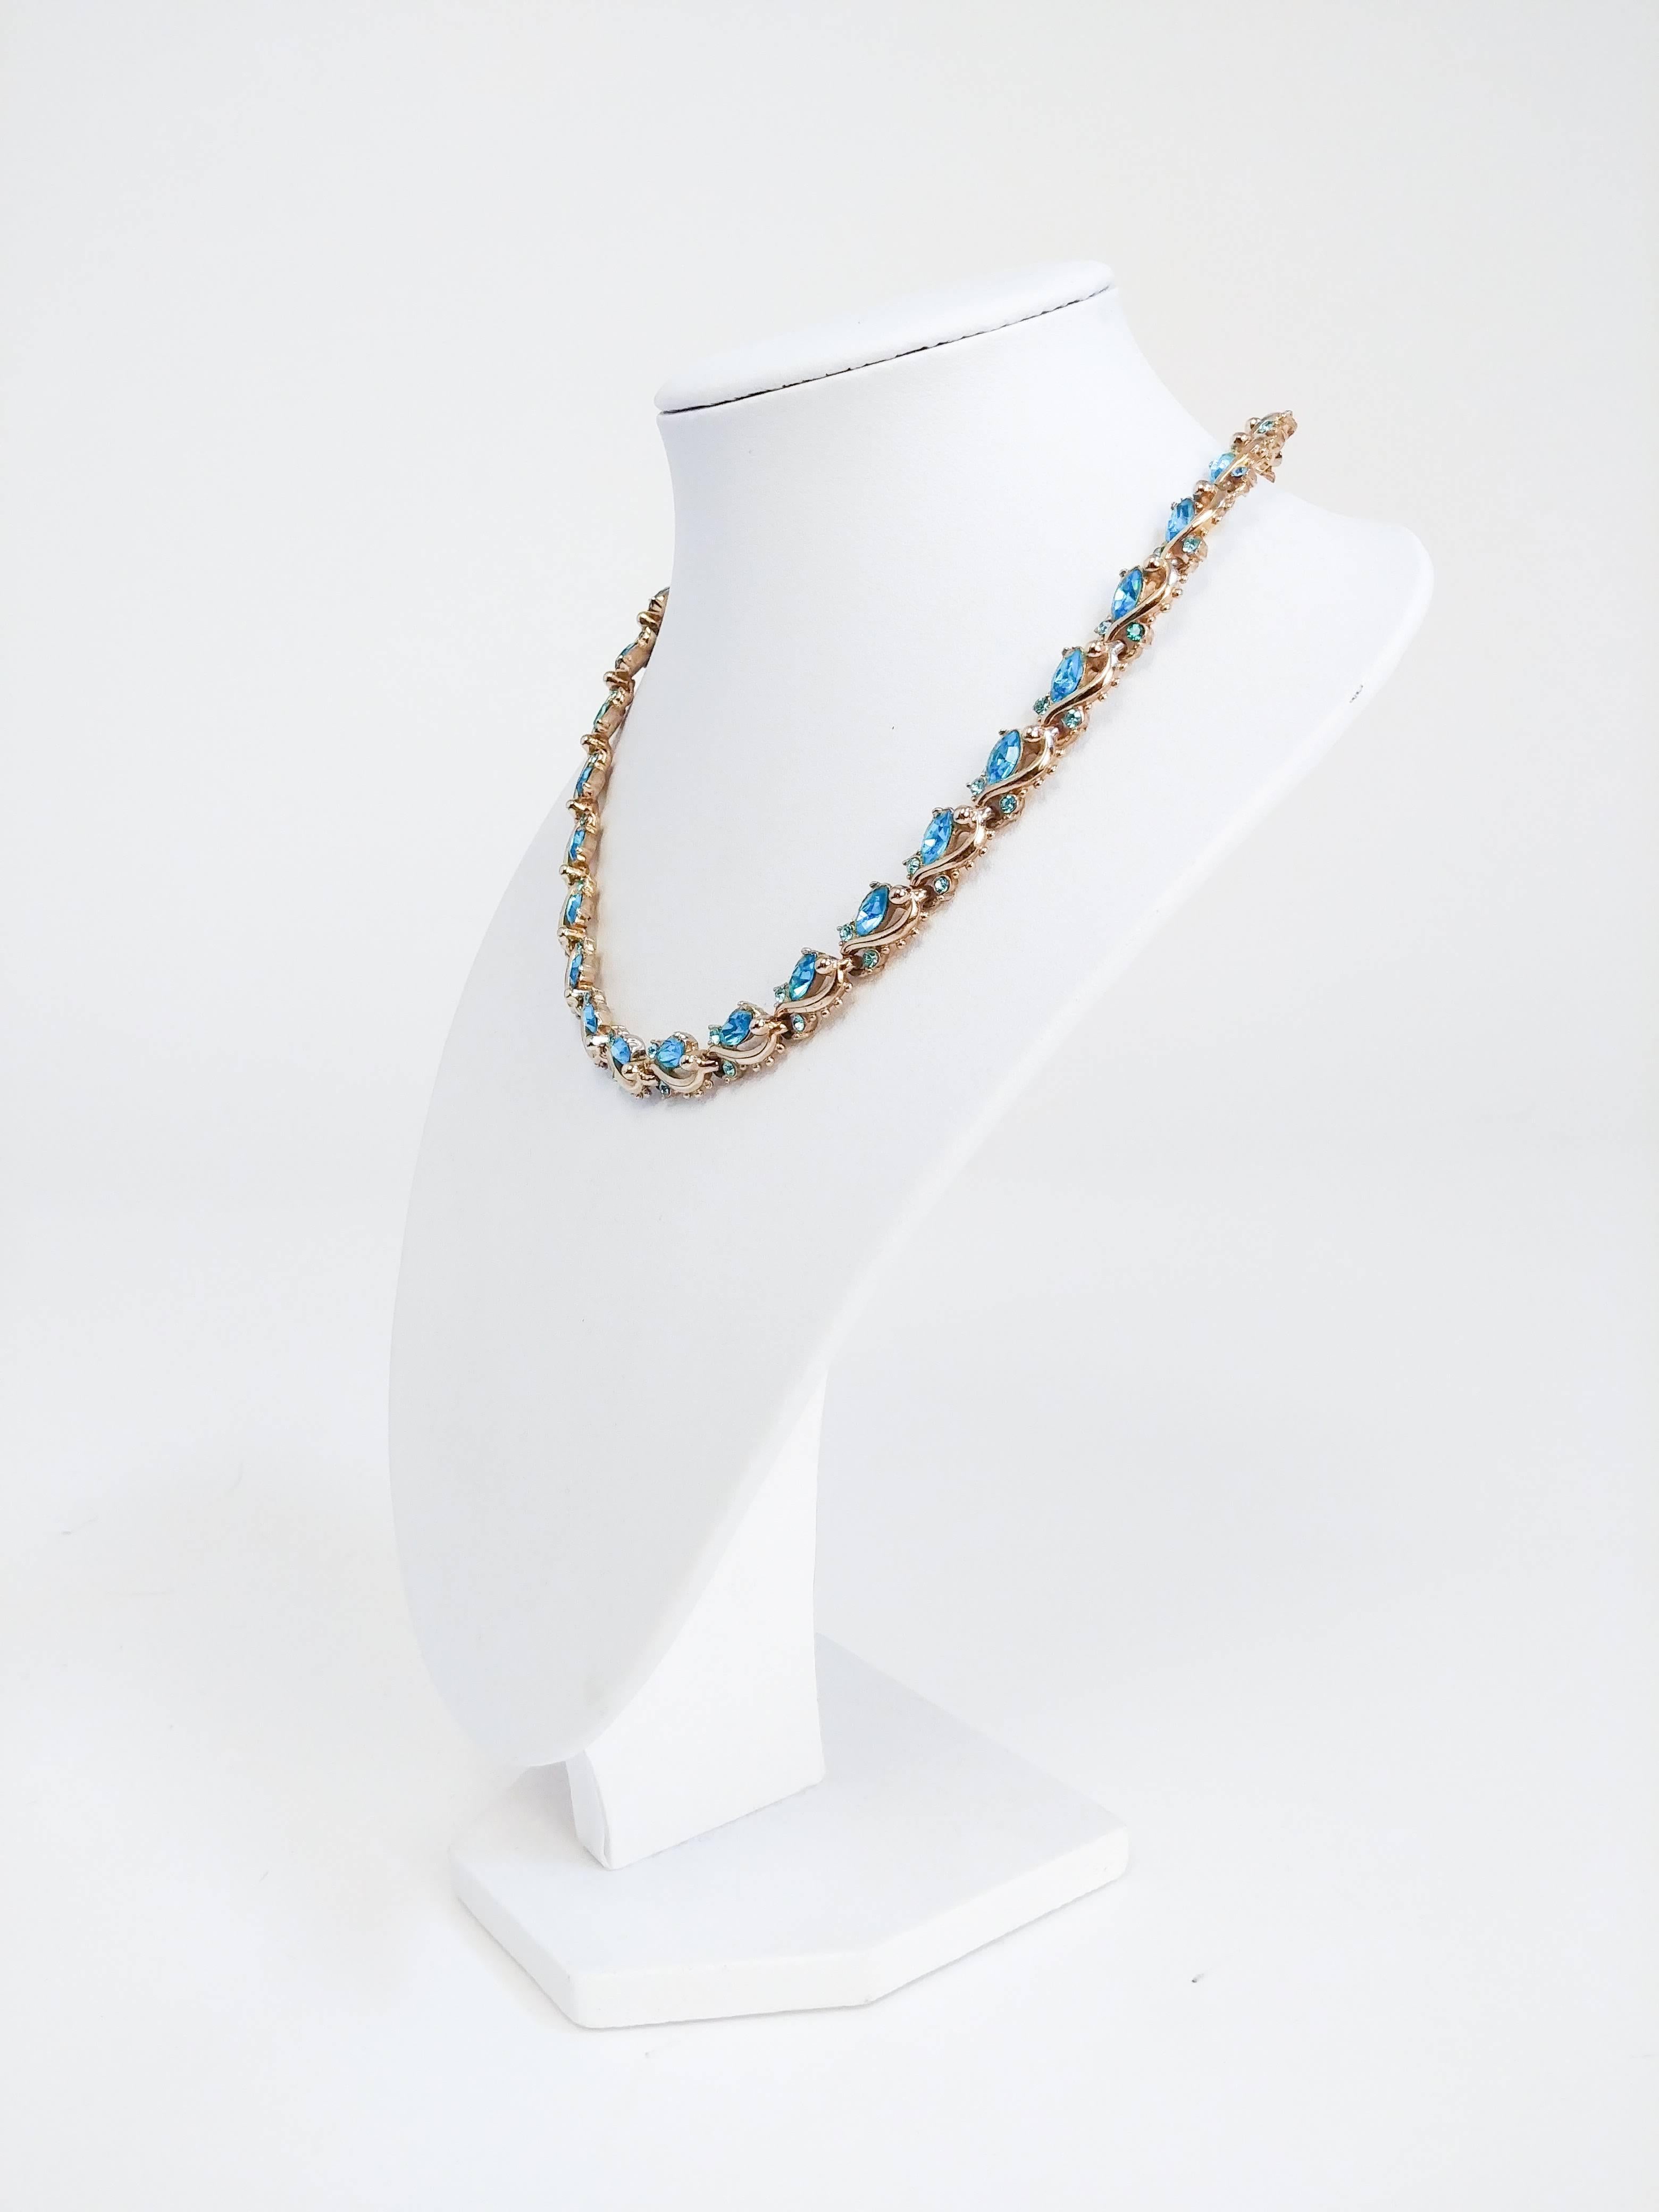 1960s Holly Craft Blue Stone & Gold-toned Necklace. Gold-toned necklace with two-toned blue stones. Adjustable length